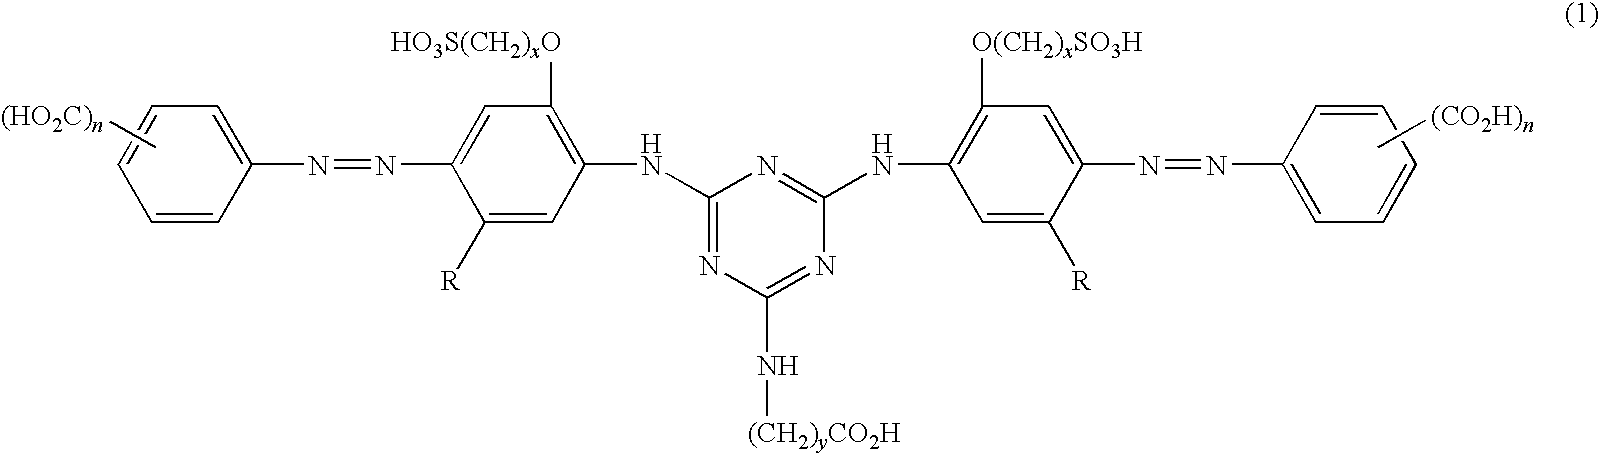 Water-soluble azo compound or salt thereof, ink composition and colored product